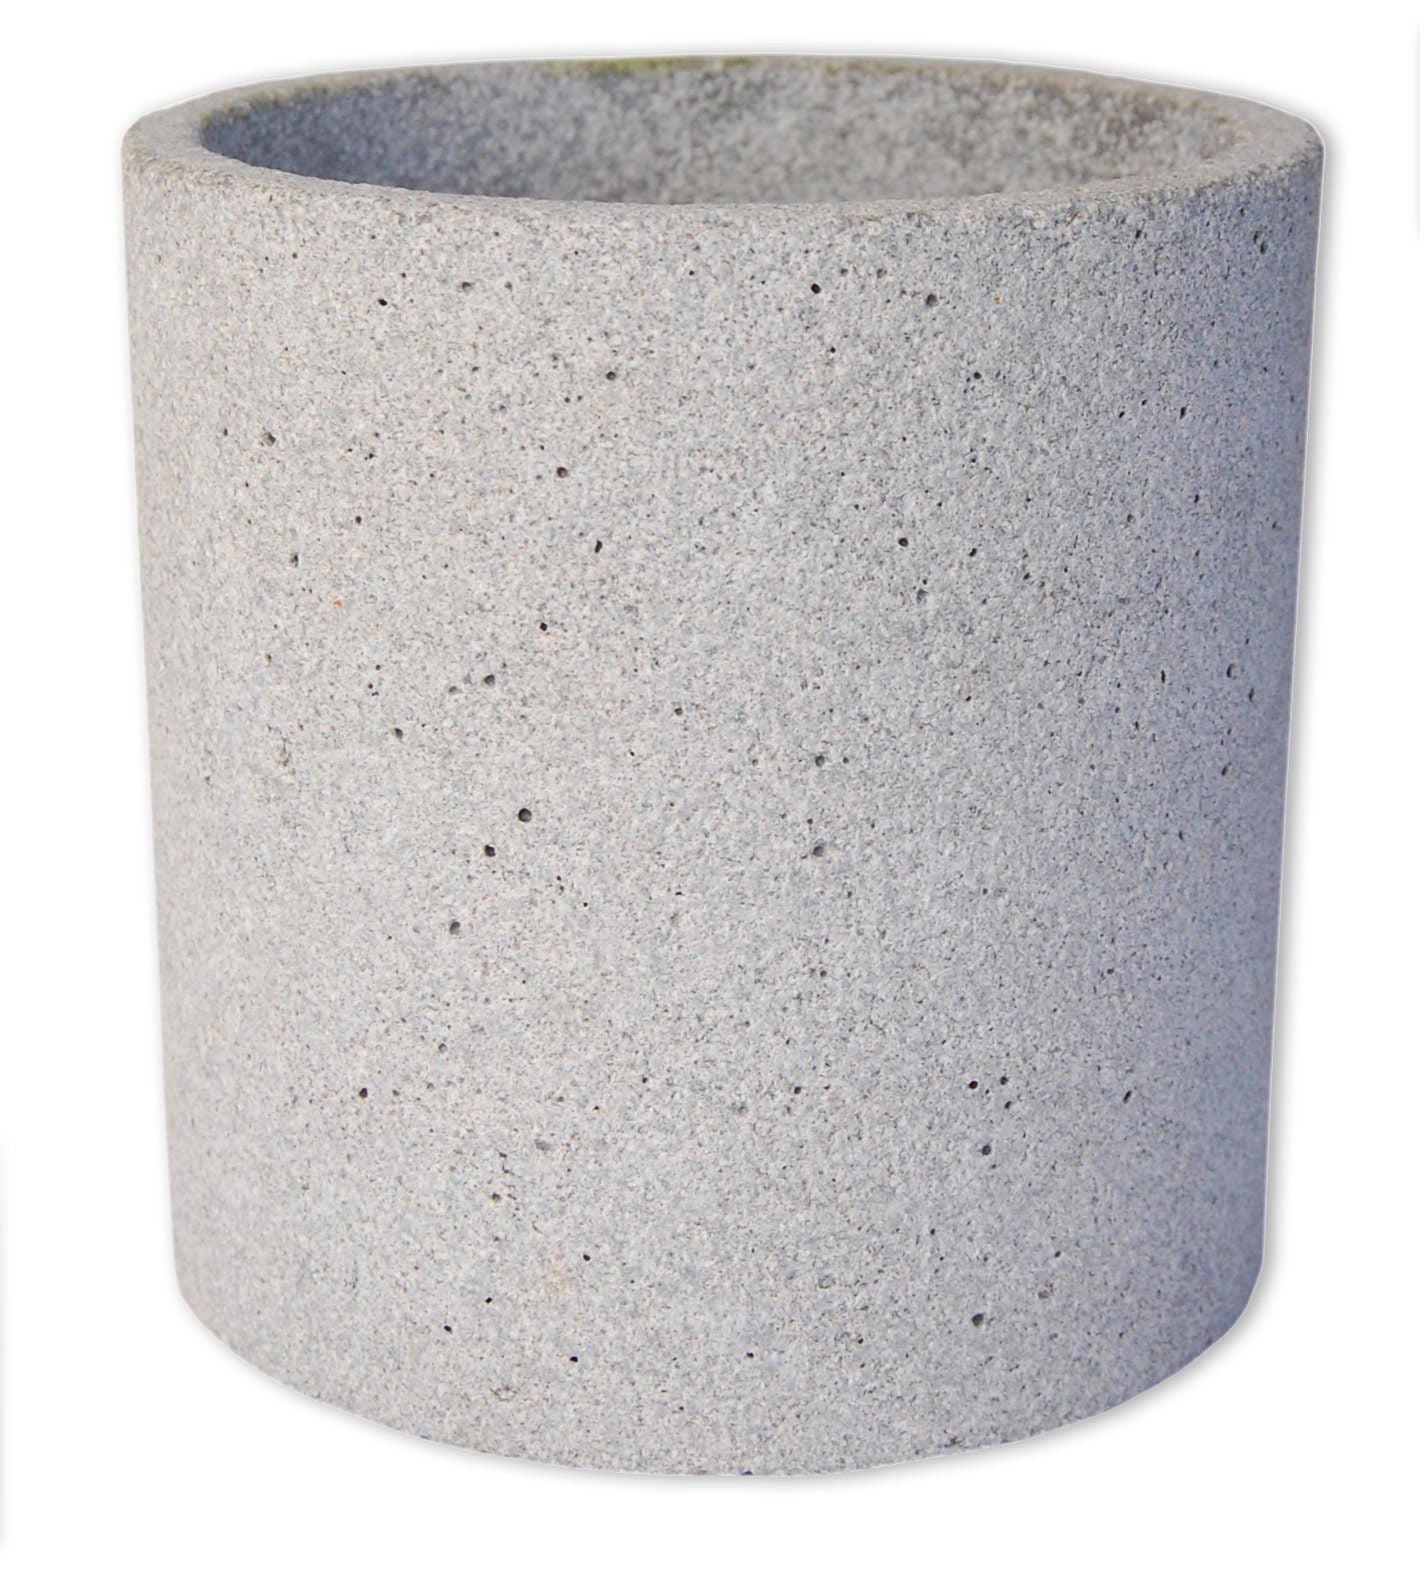 Concrete pot large natural by Zakkia - Toast and honey studio